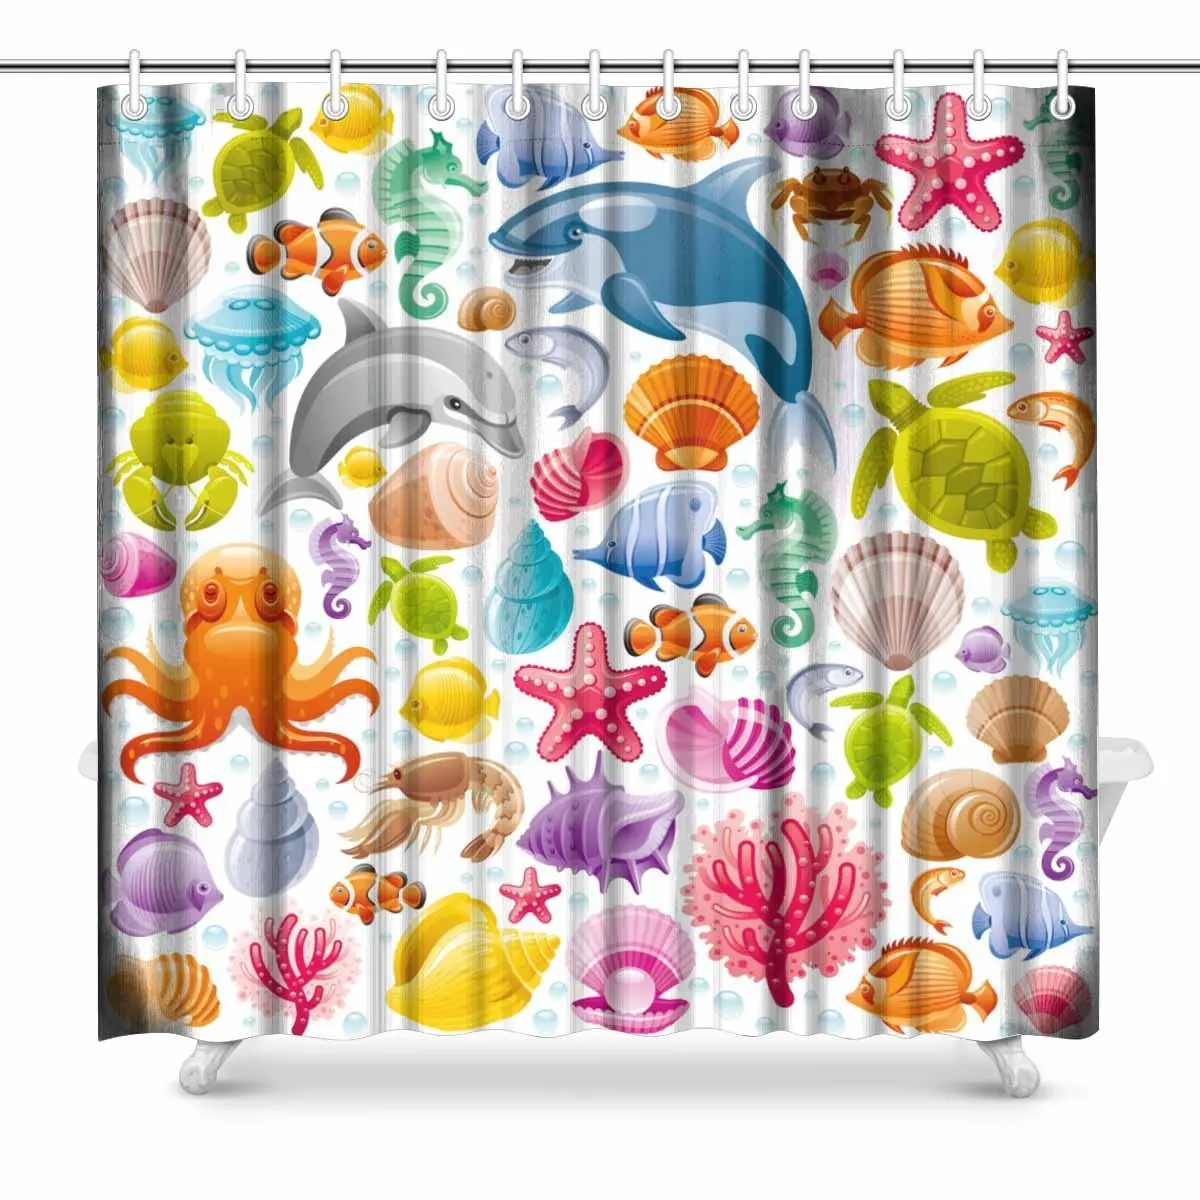 Us 35 99 Aplysia Psychedelic Trippy Hippie 60s Colors Magic Mushroom Hallucination Bathroom Decor Shower Curtain Set With Hooks In Shower Curtains